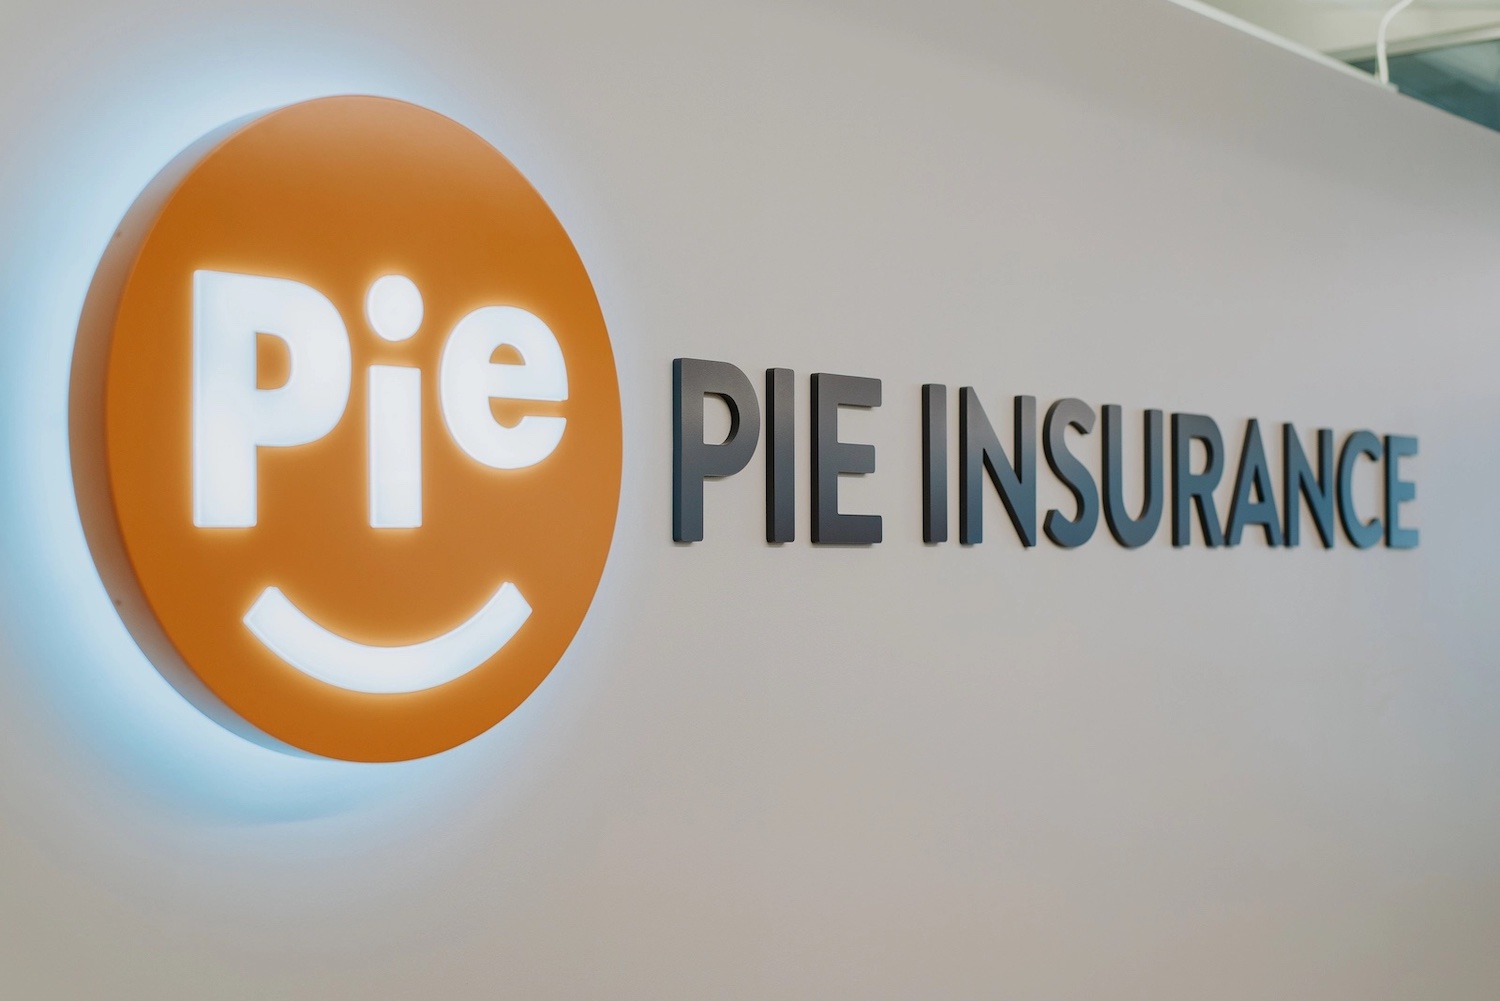 Pie Insurance logo on the wall of its Denver office.